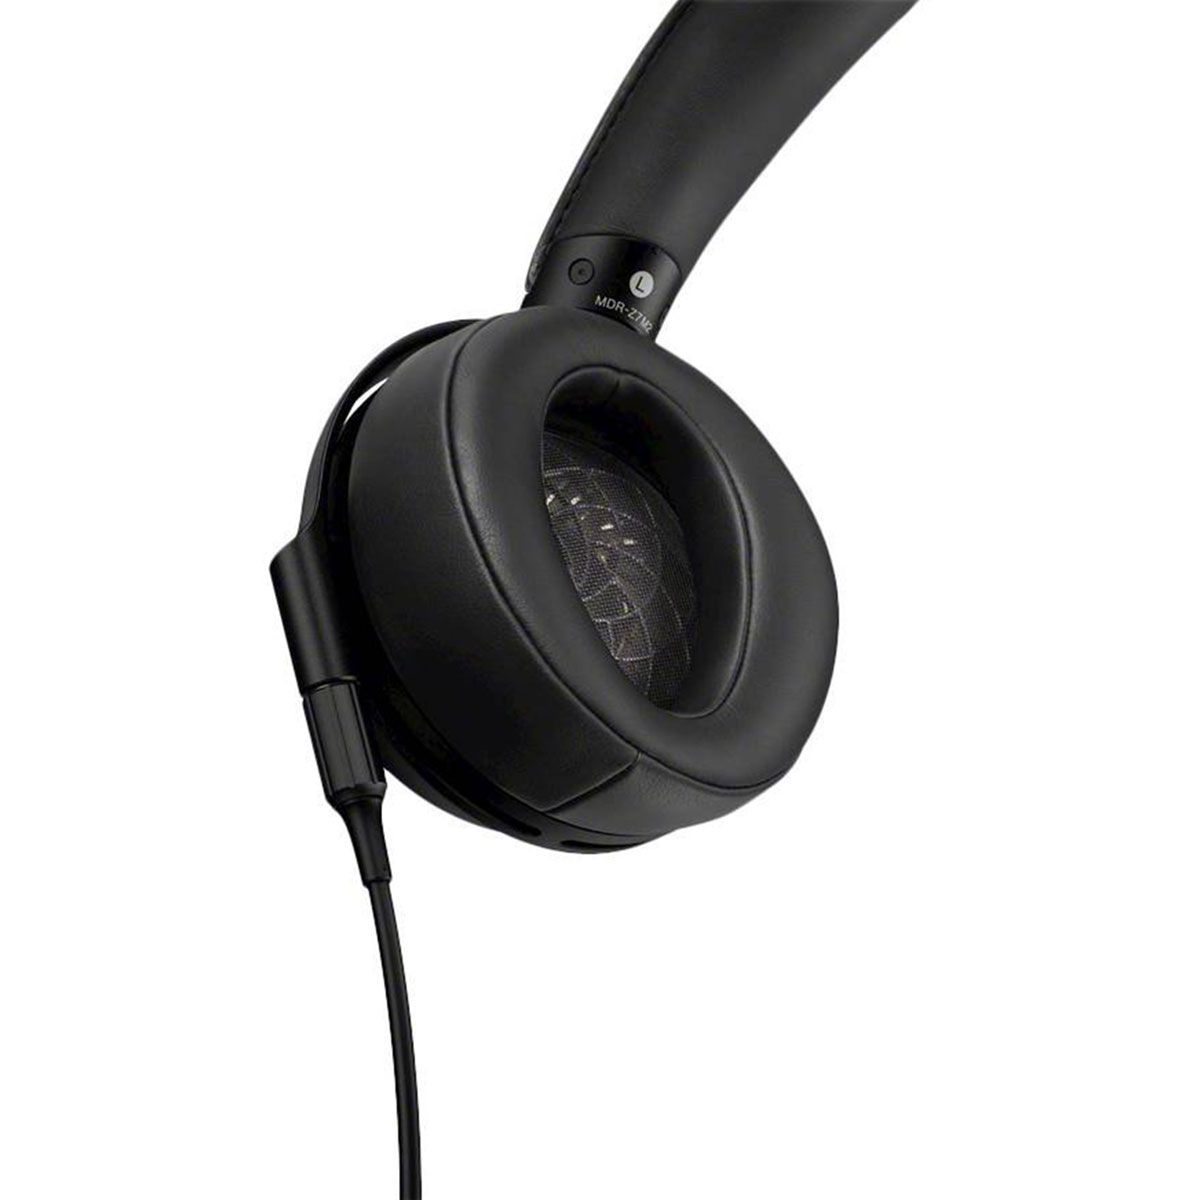 MDR-Z7M2 Hi-Res Stereo Over-Ear Headphones Ear Cup